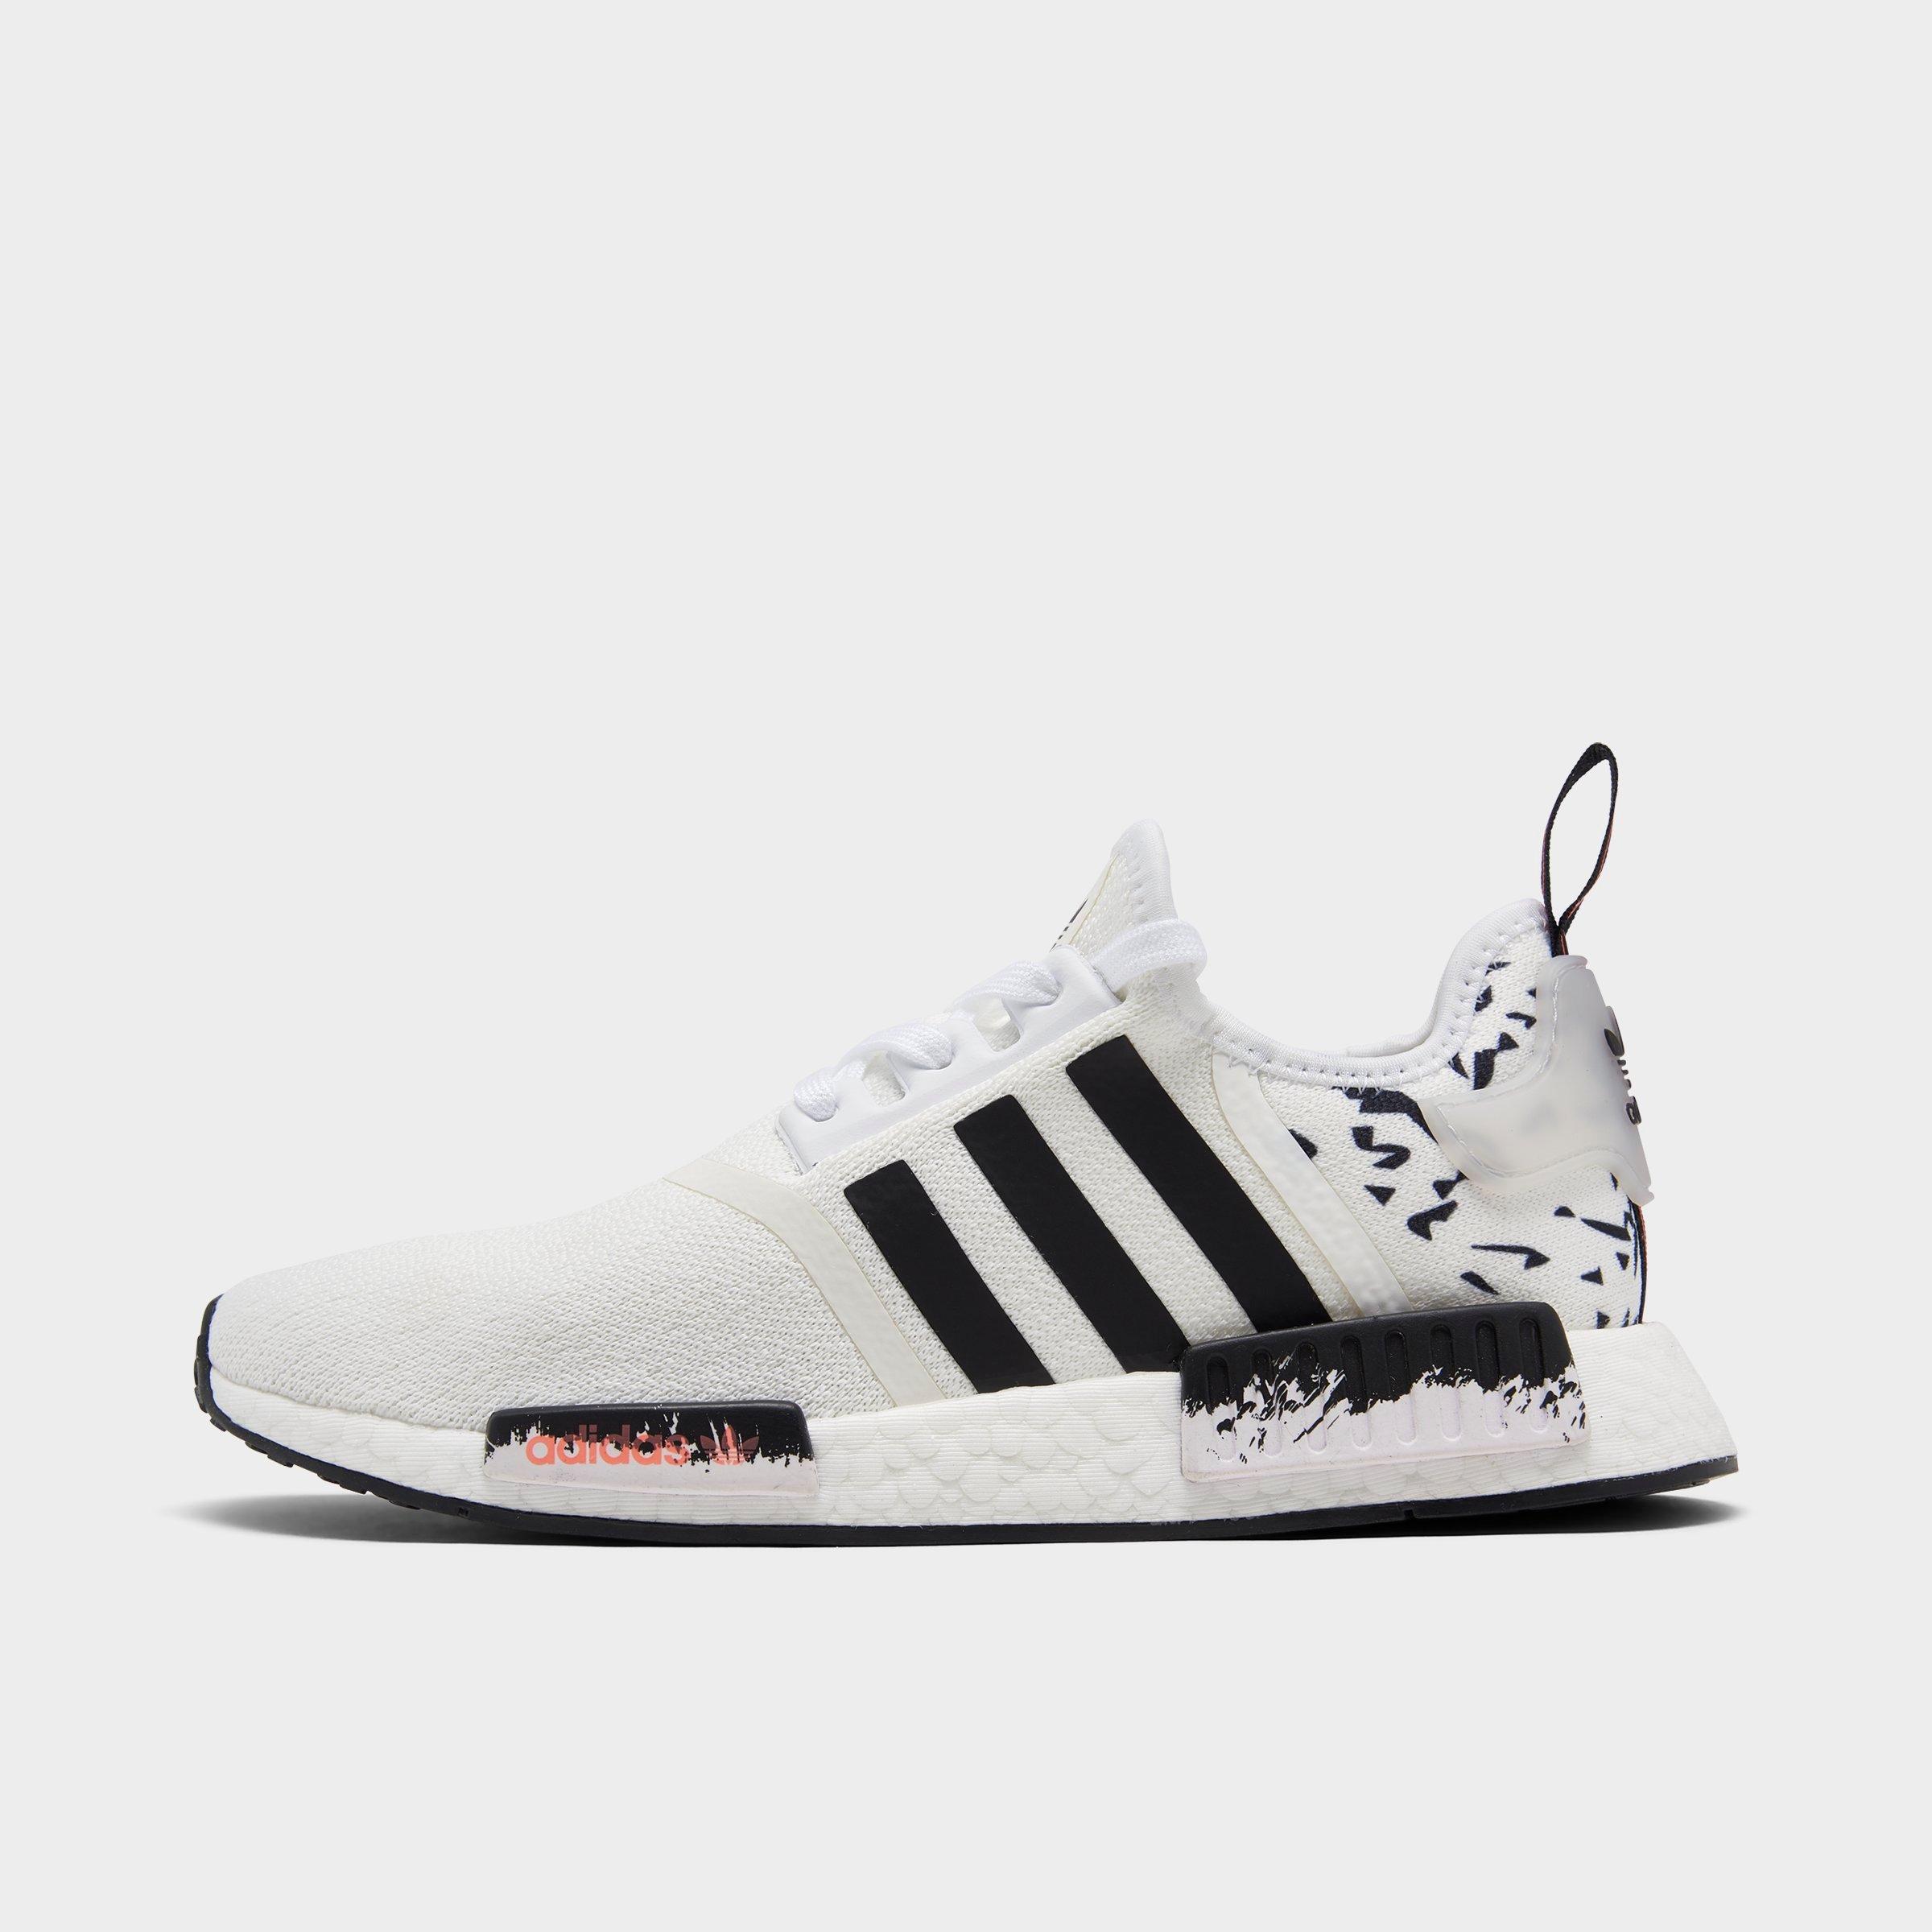 adidas nmd r1 casual shoes